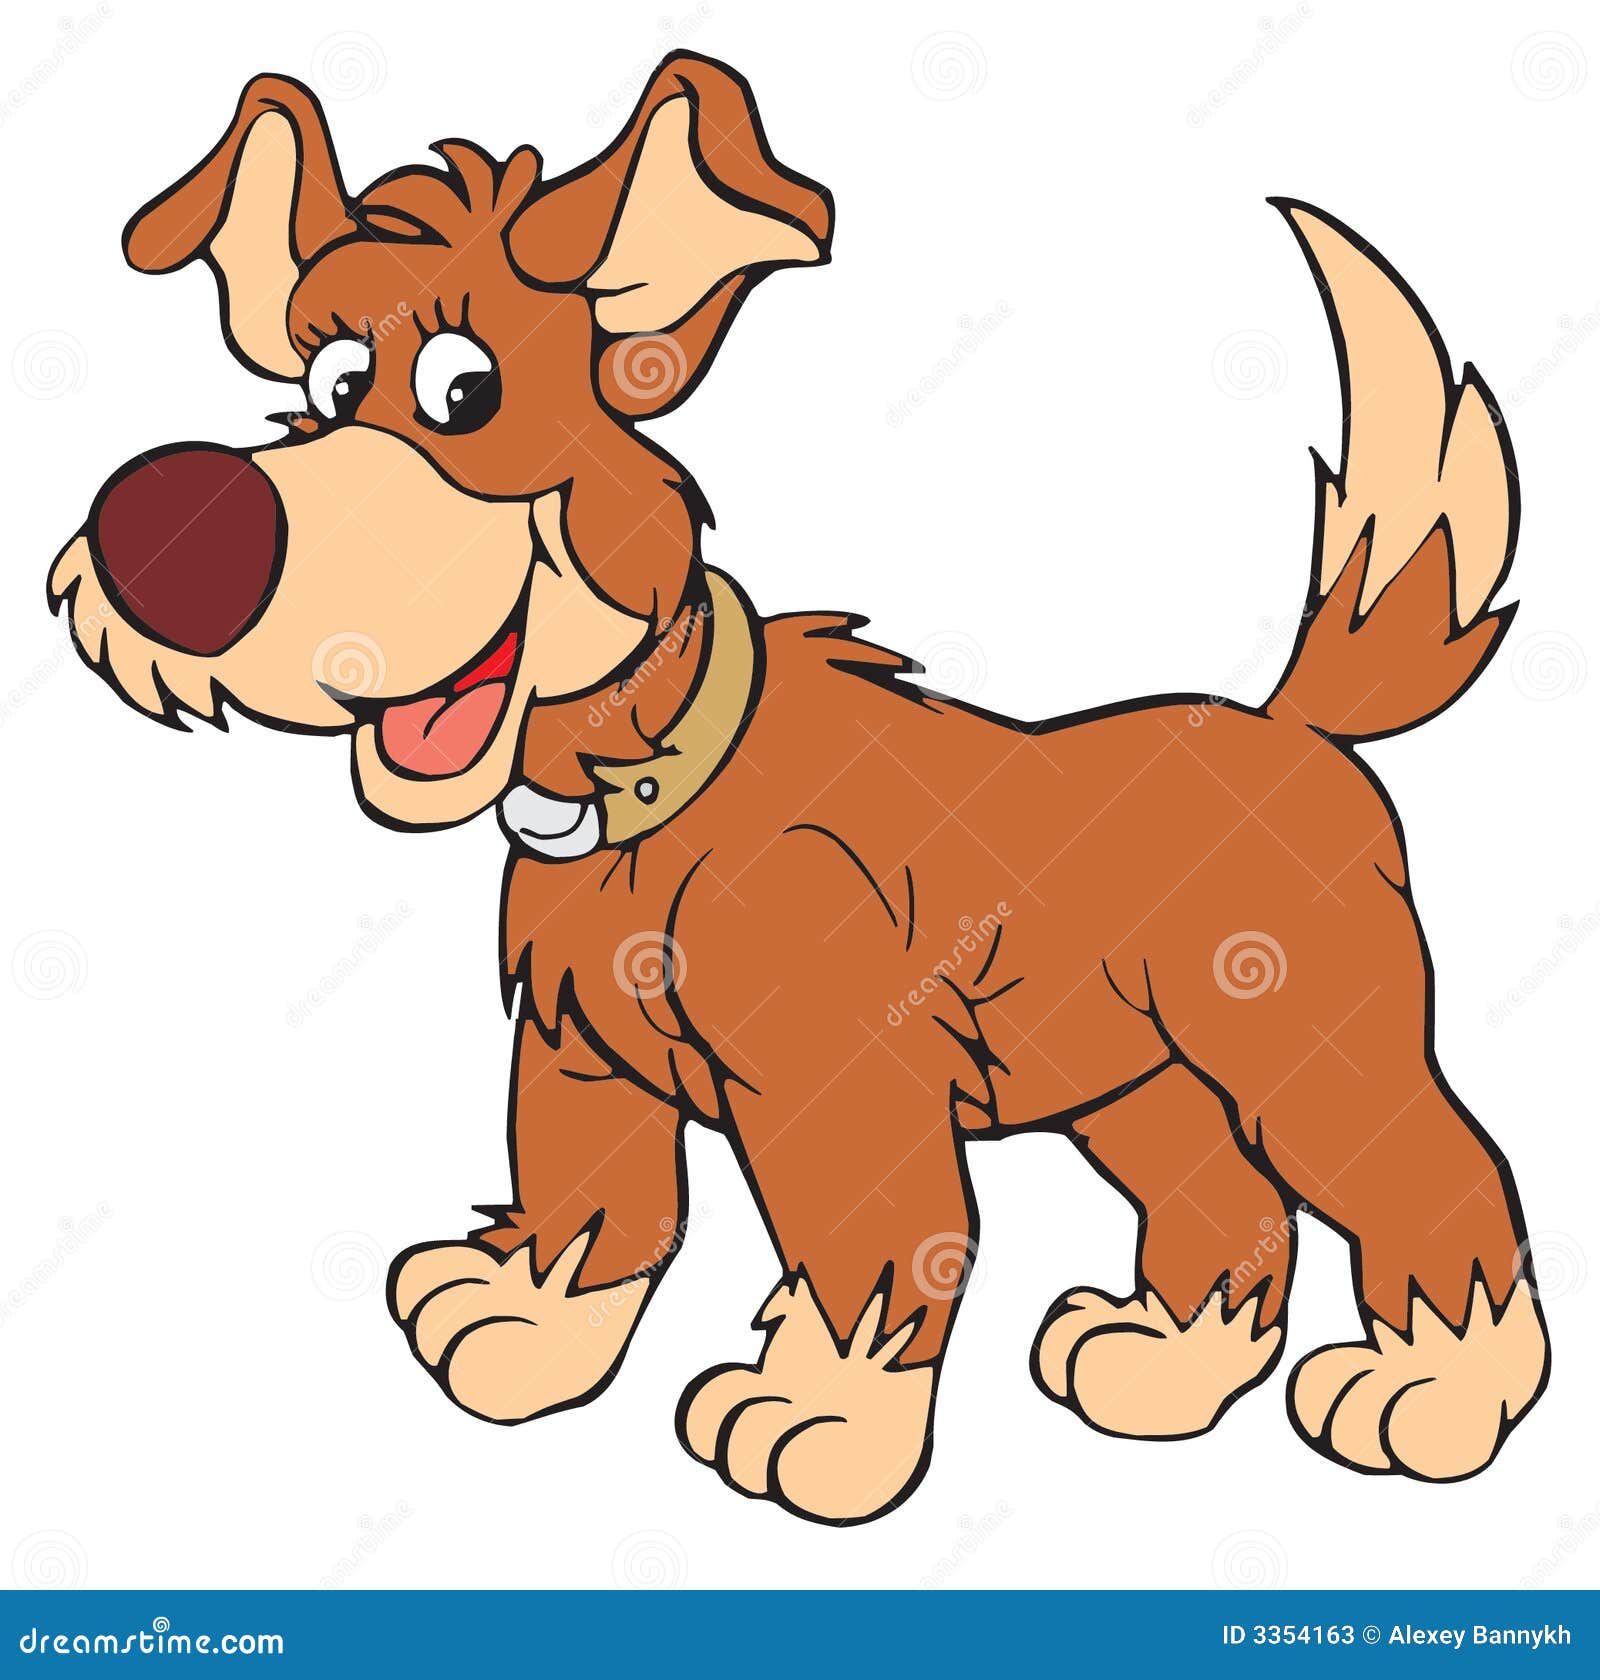 free vector dog clipart - photo #22